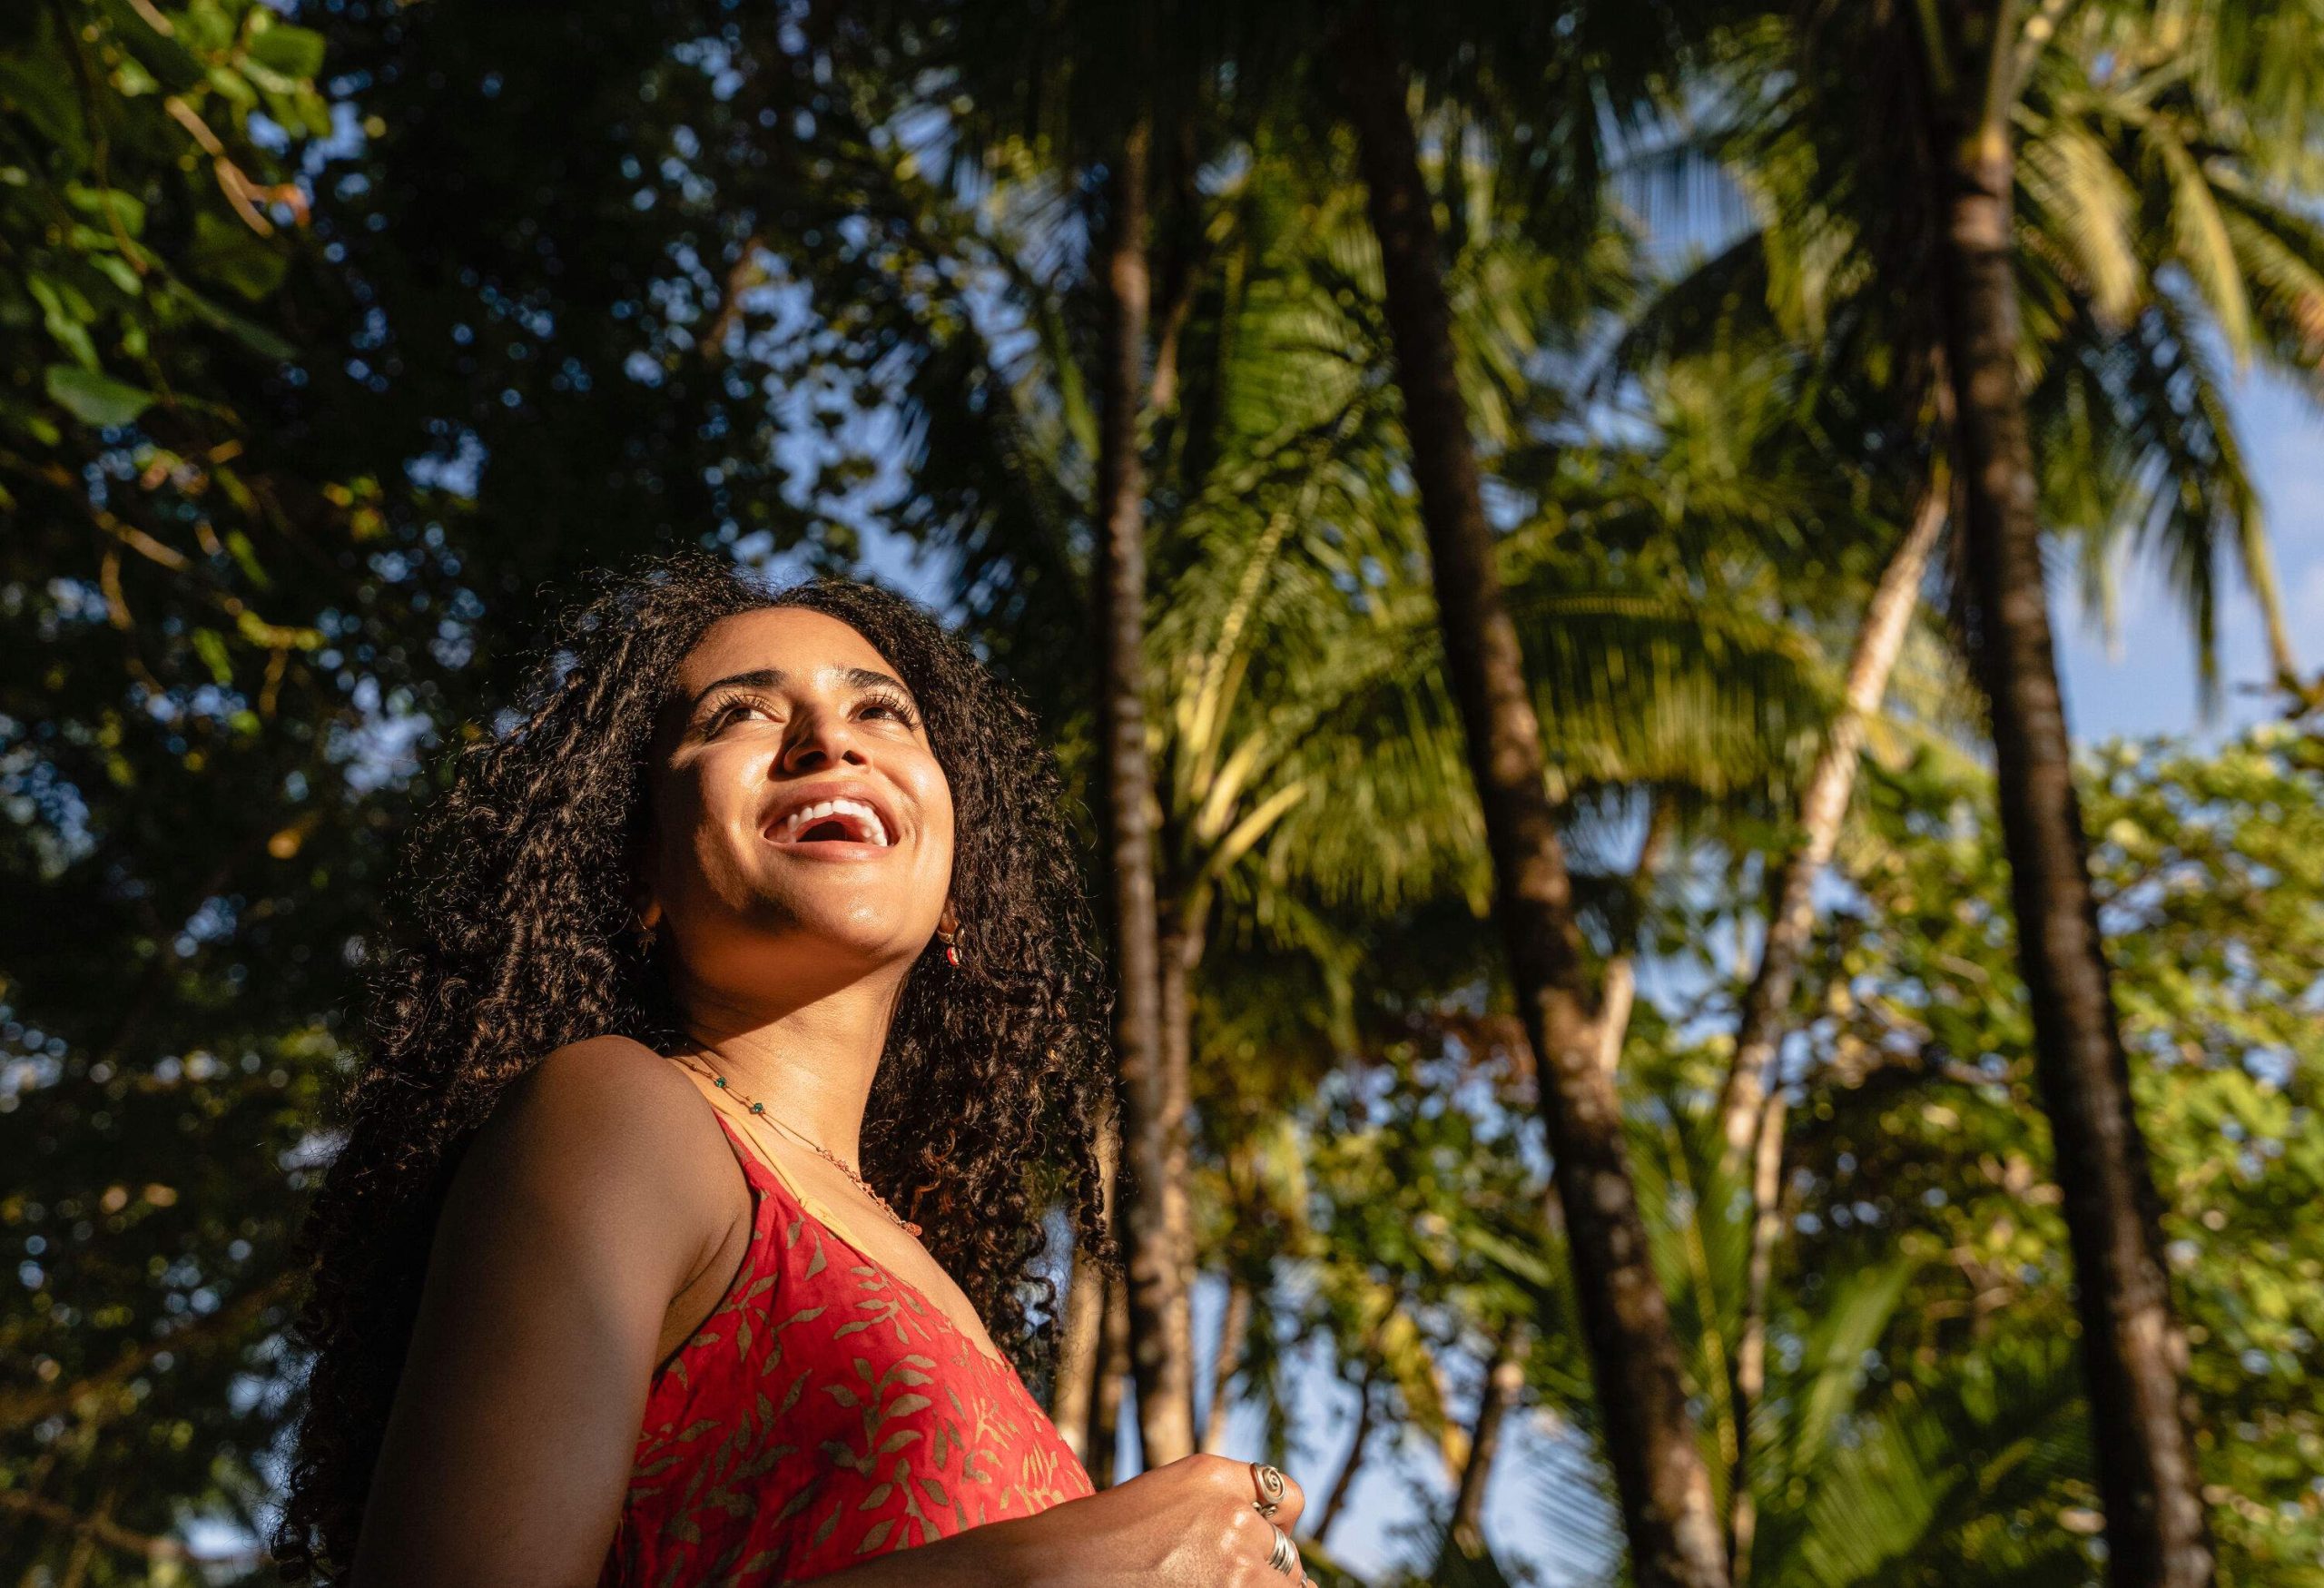 A curly-haired woman smiles under a canopy of palm trees.